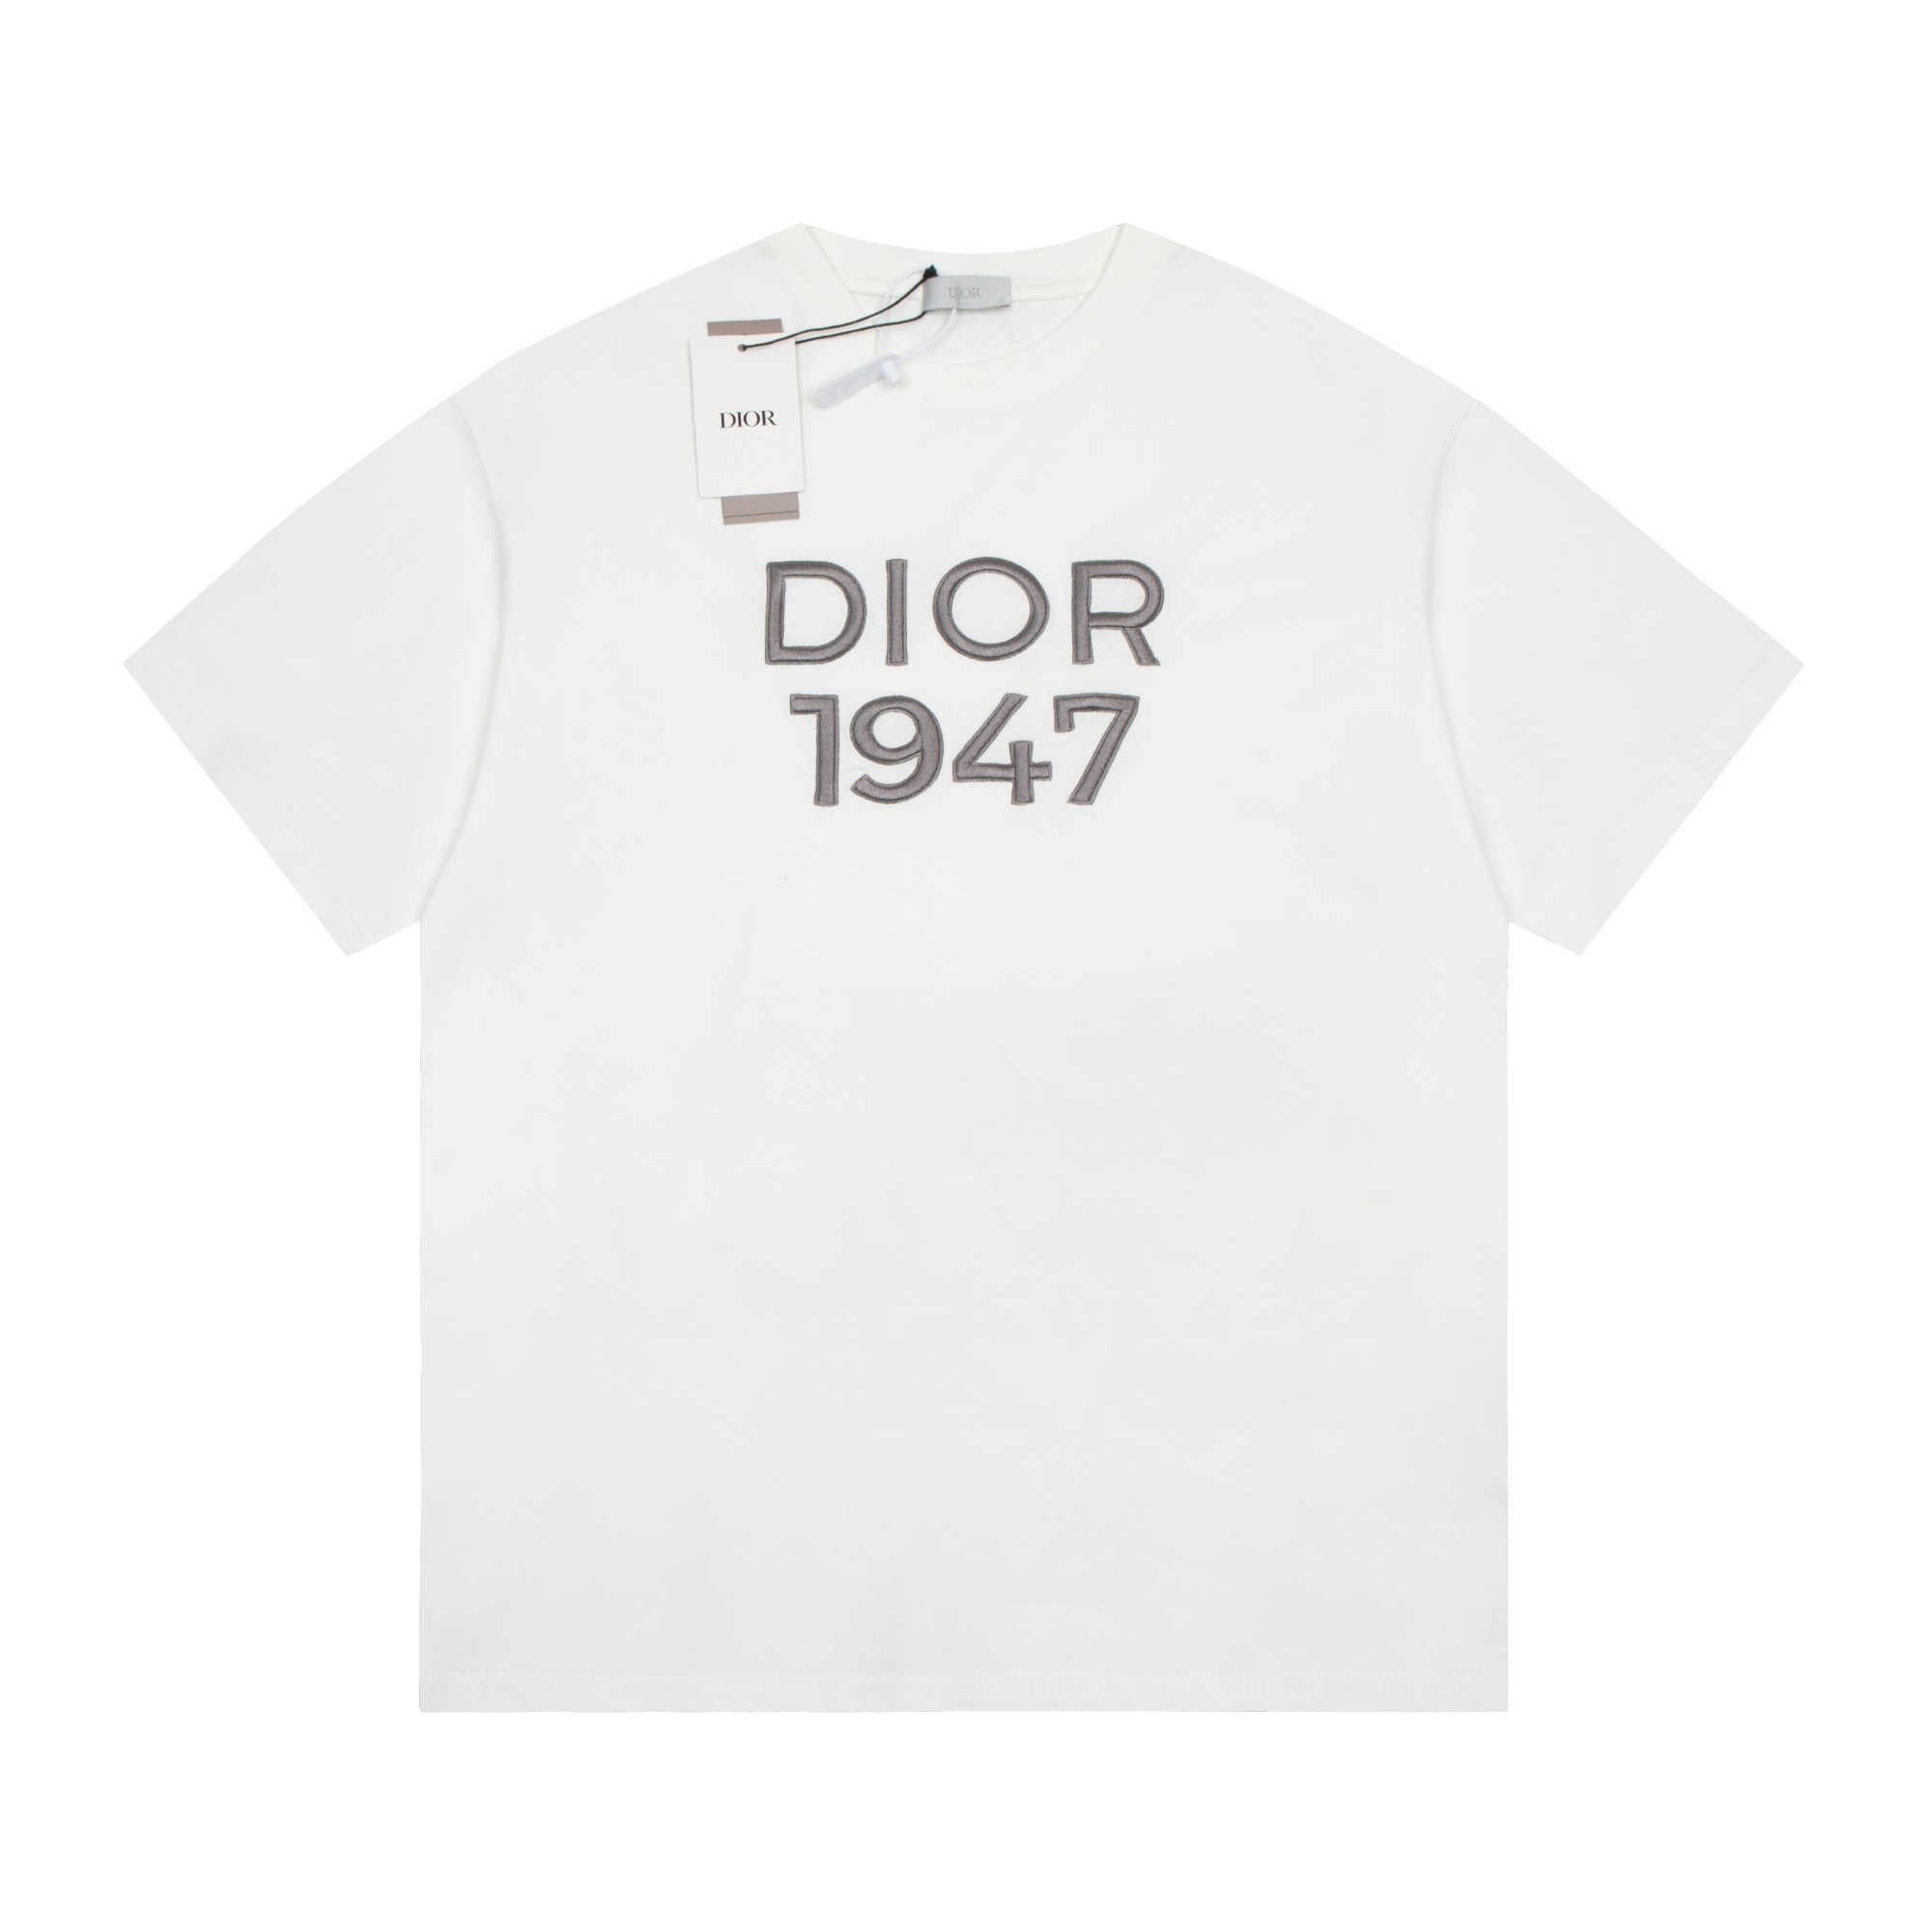 Dior 1947 graphic embroidered letter T-shirt